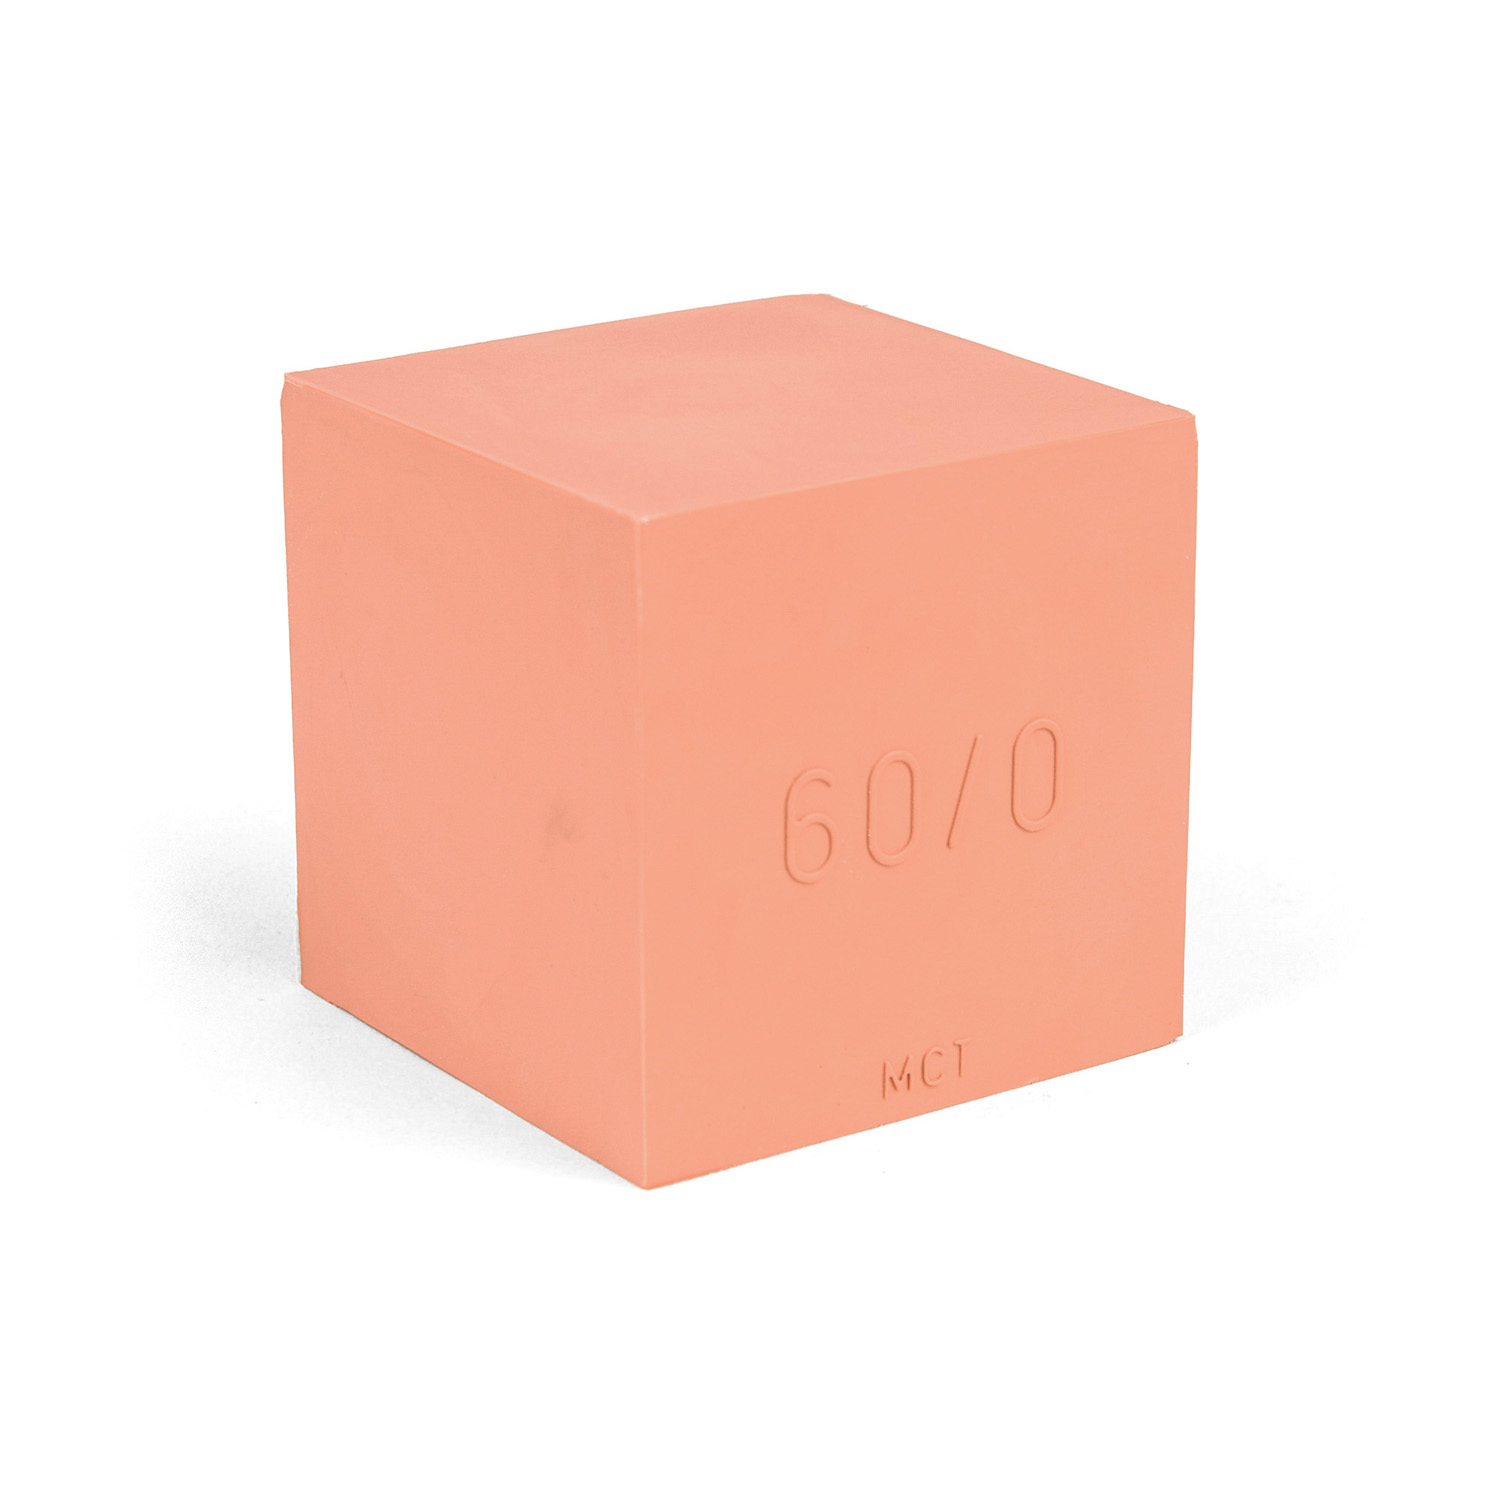 60-0 Spare block lycron, 60-0 solid block size 60x60mm